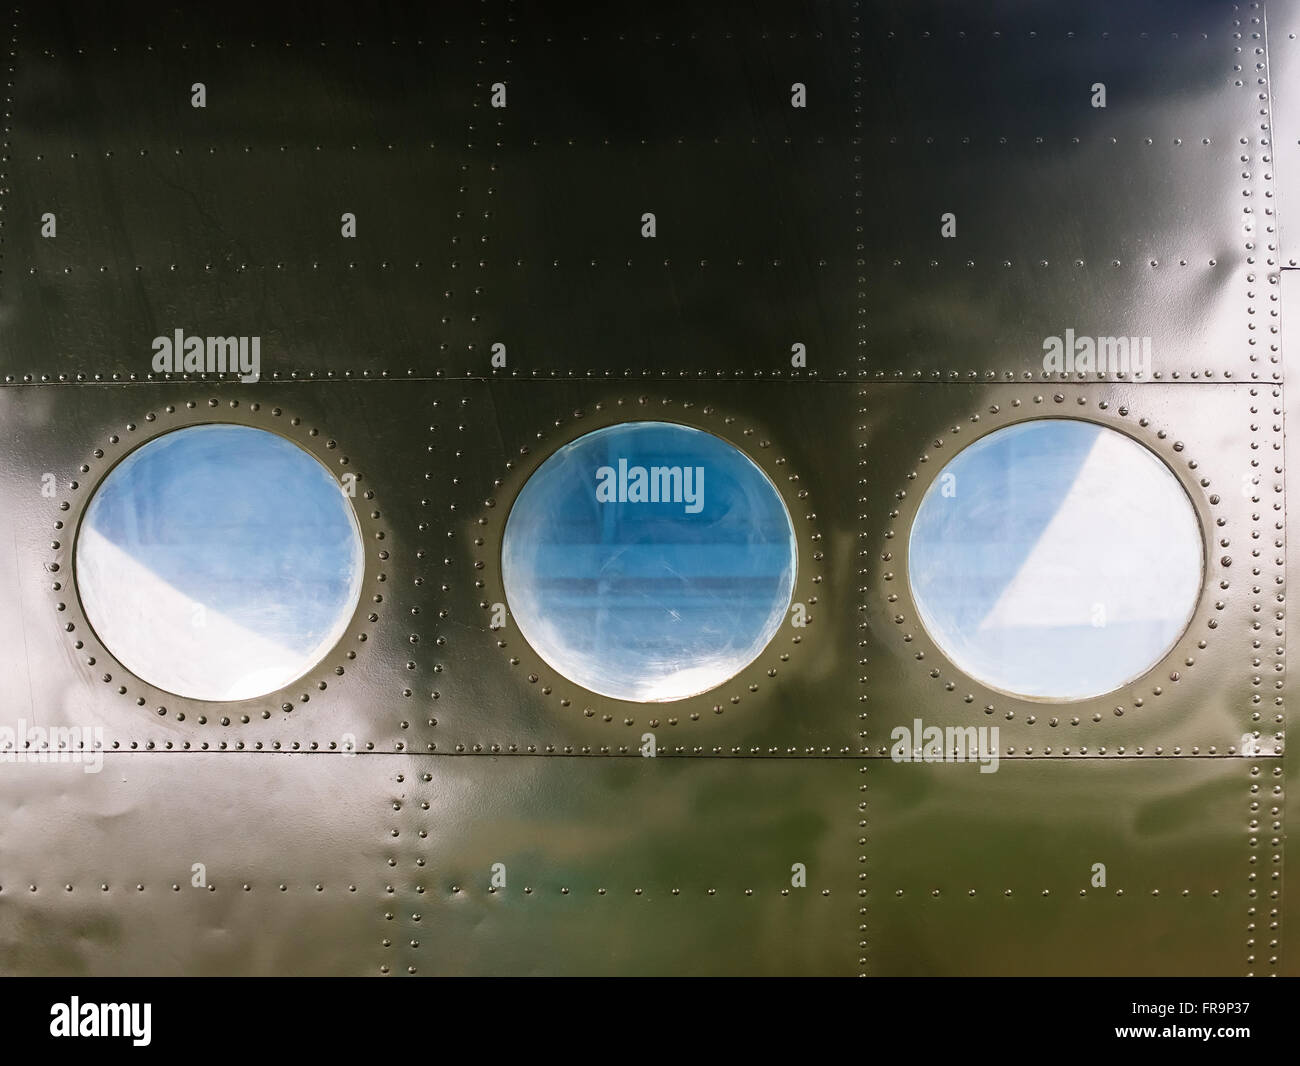 Portholes on military green painted metal background with rivet. Three portholes on board old retro airplane. Stock Photo